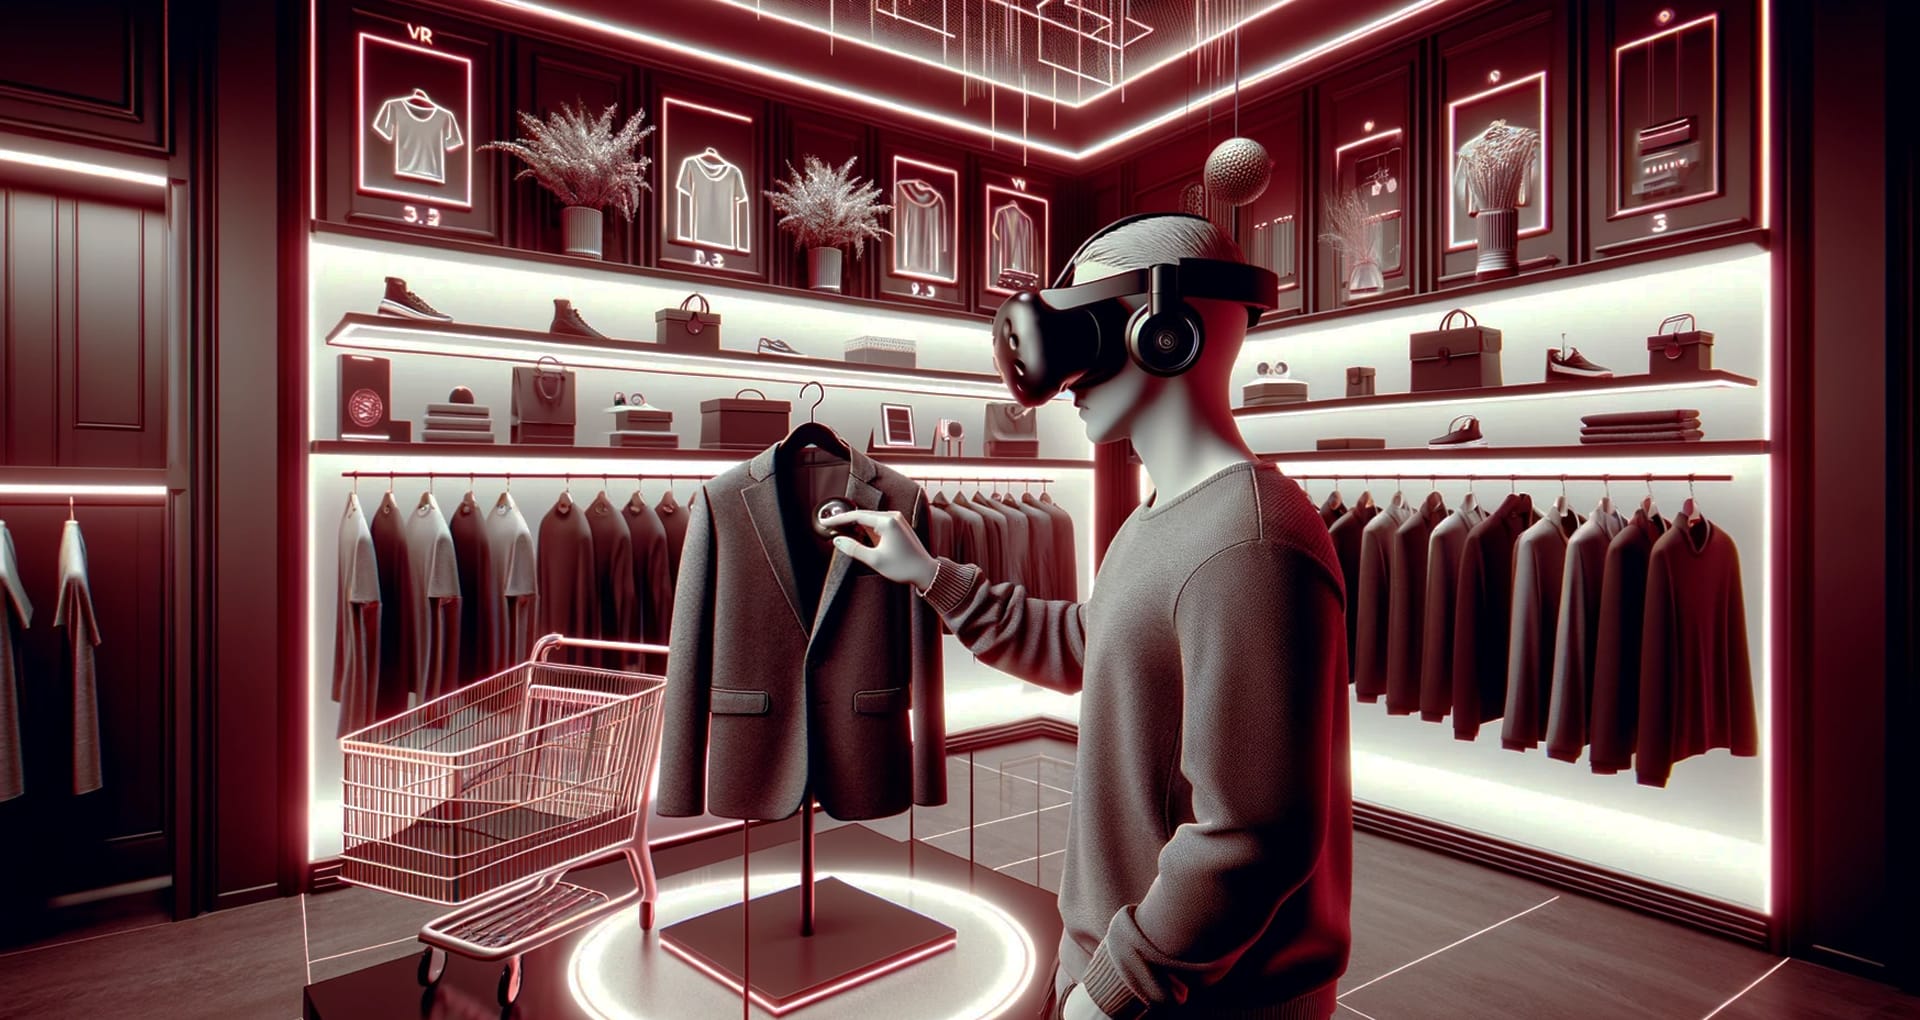 Essential Insights into Virtual and Augmented Reality Applications: